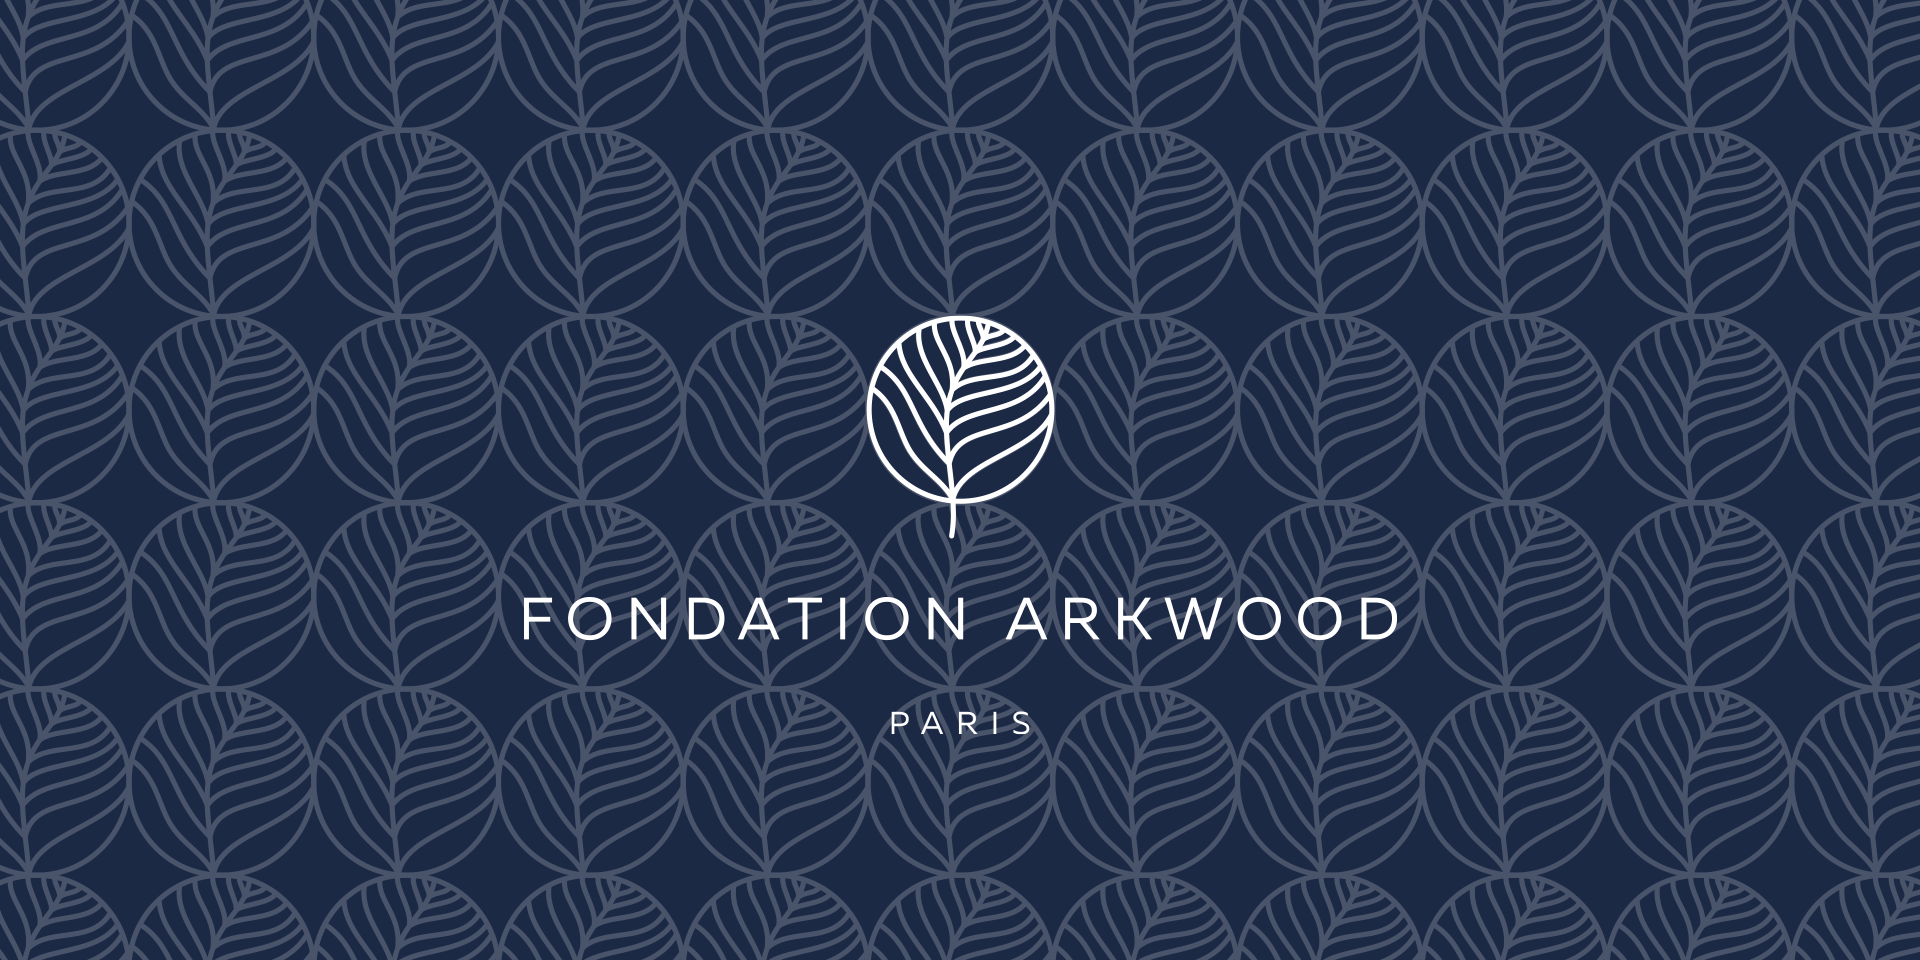 Launch of the Arkwood Foundation